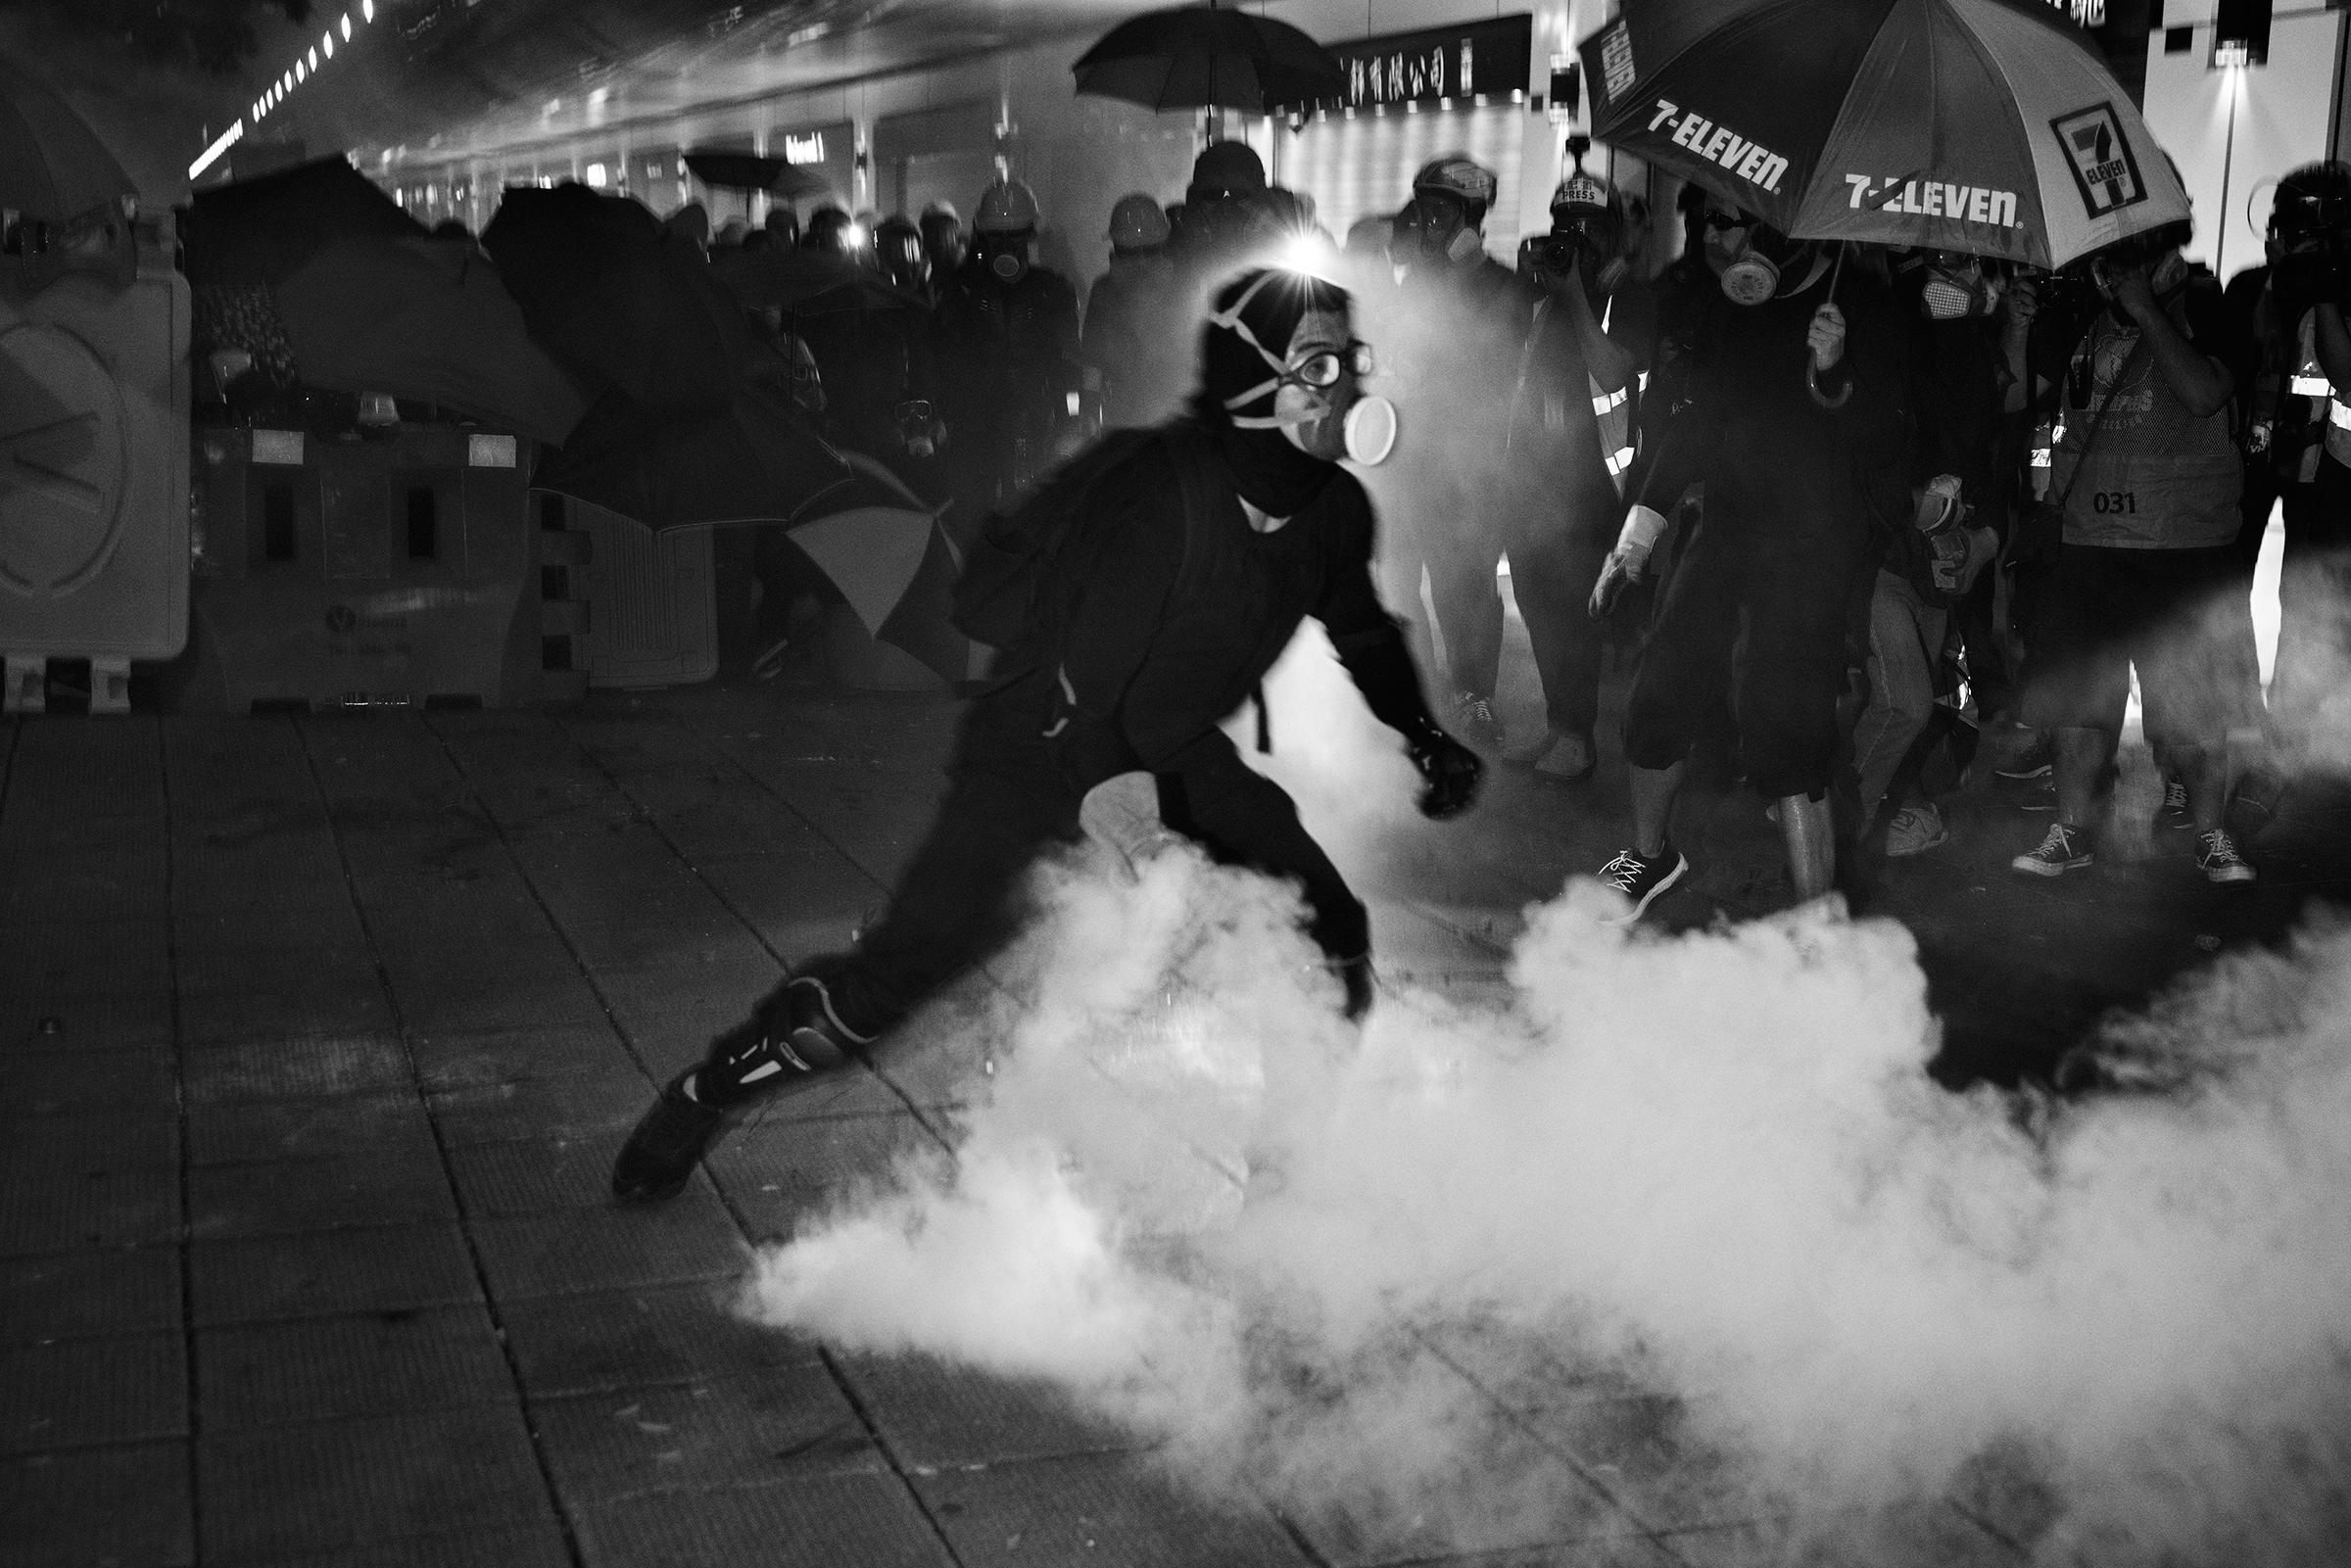 A protester throws a live tear-gas canister back at riot police during a protest near Tsim Sha Tsui police station in Kowloon, Hong Kong, on Aug. 11. (Adam Ferguson for TIME)